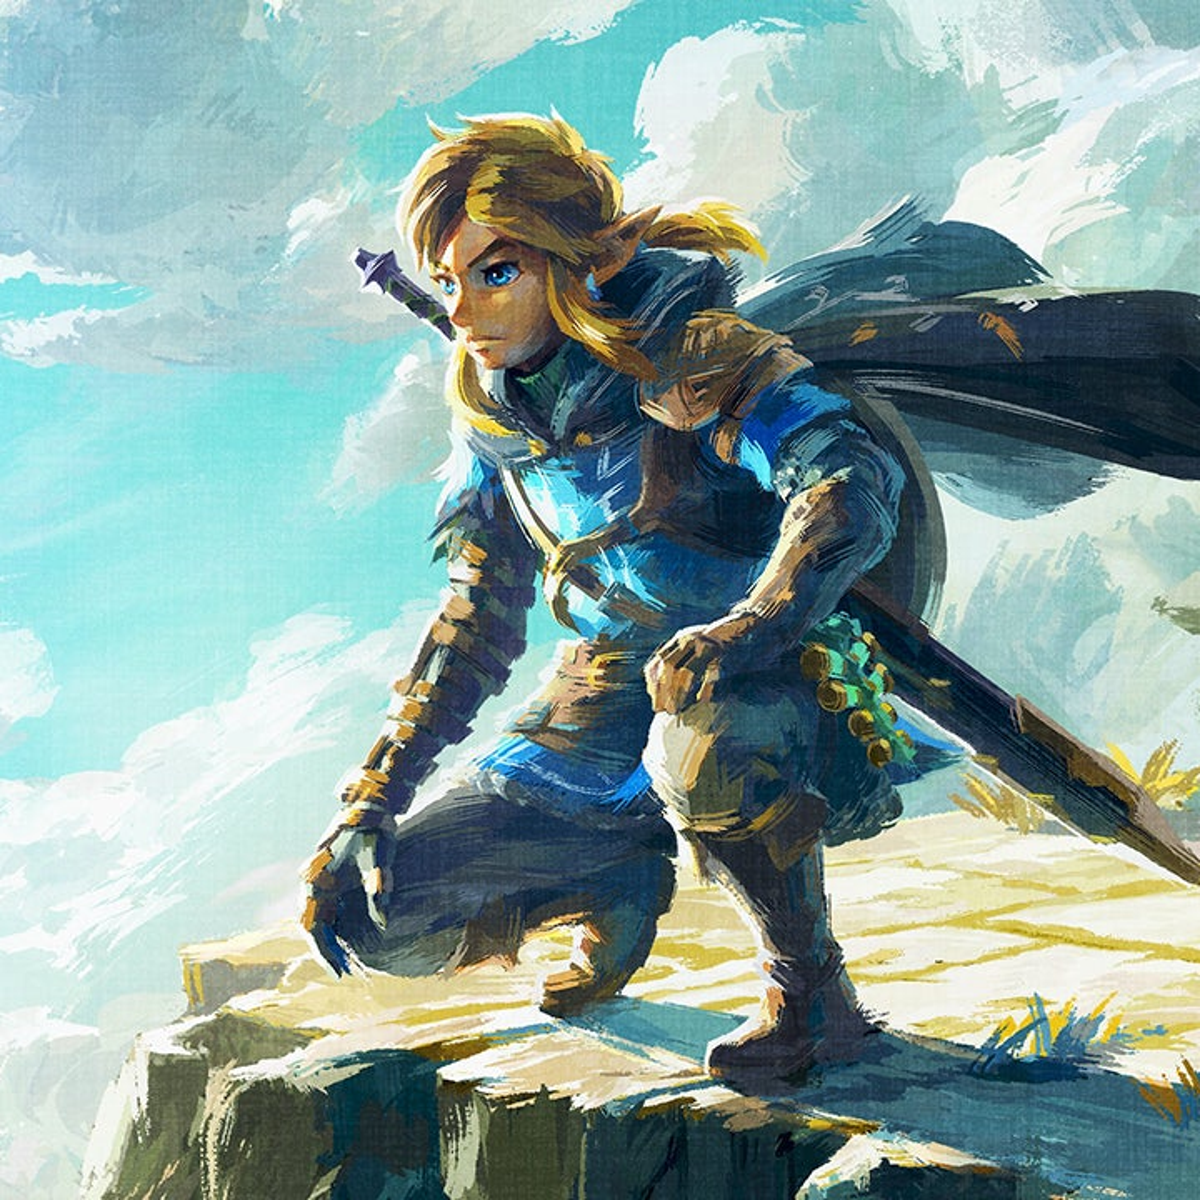 What do you make of the new The Legend of Zelda: Tears of the